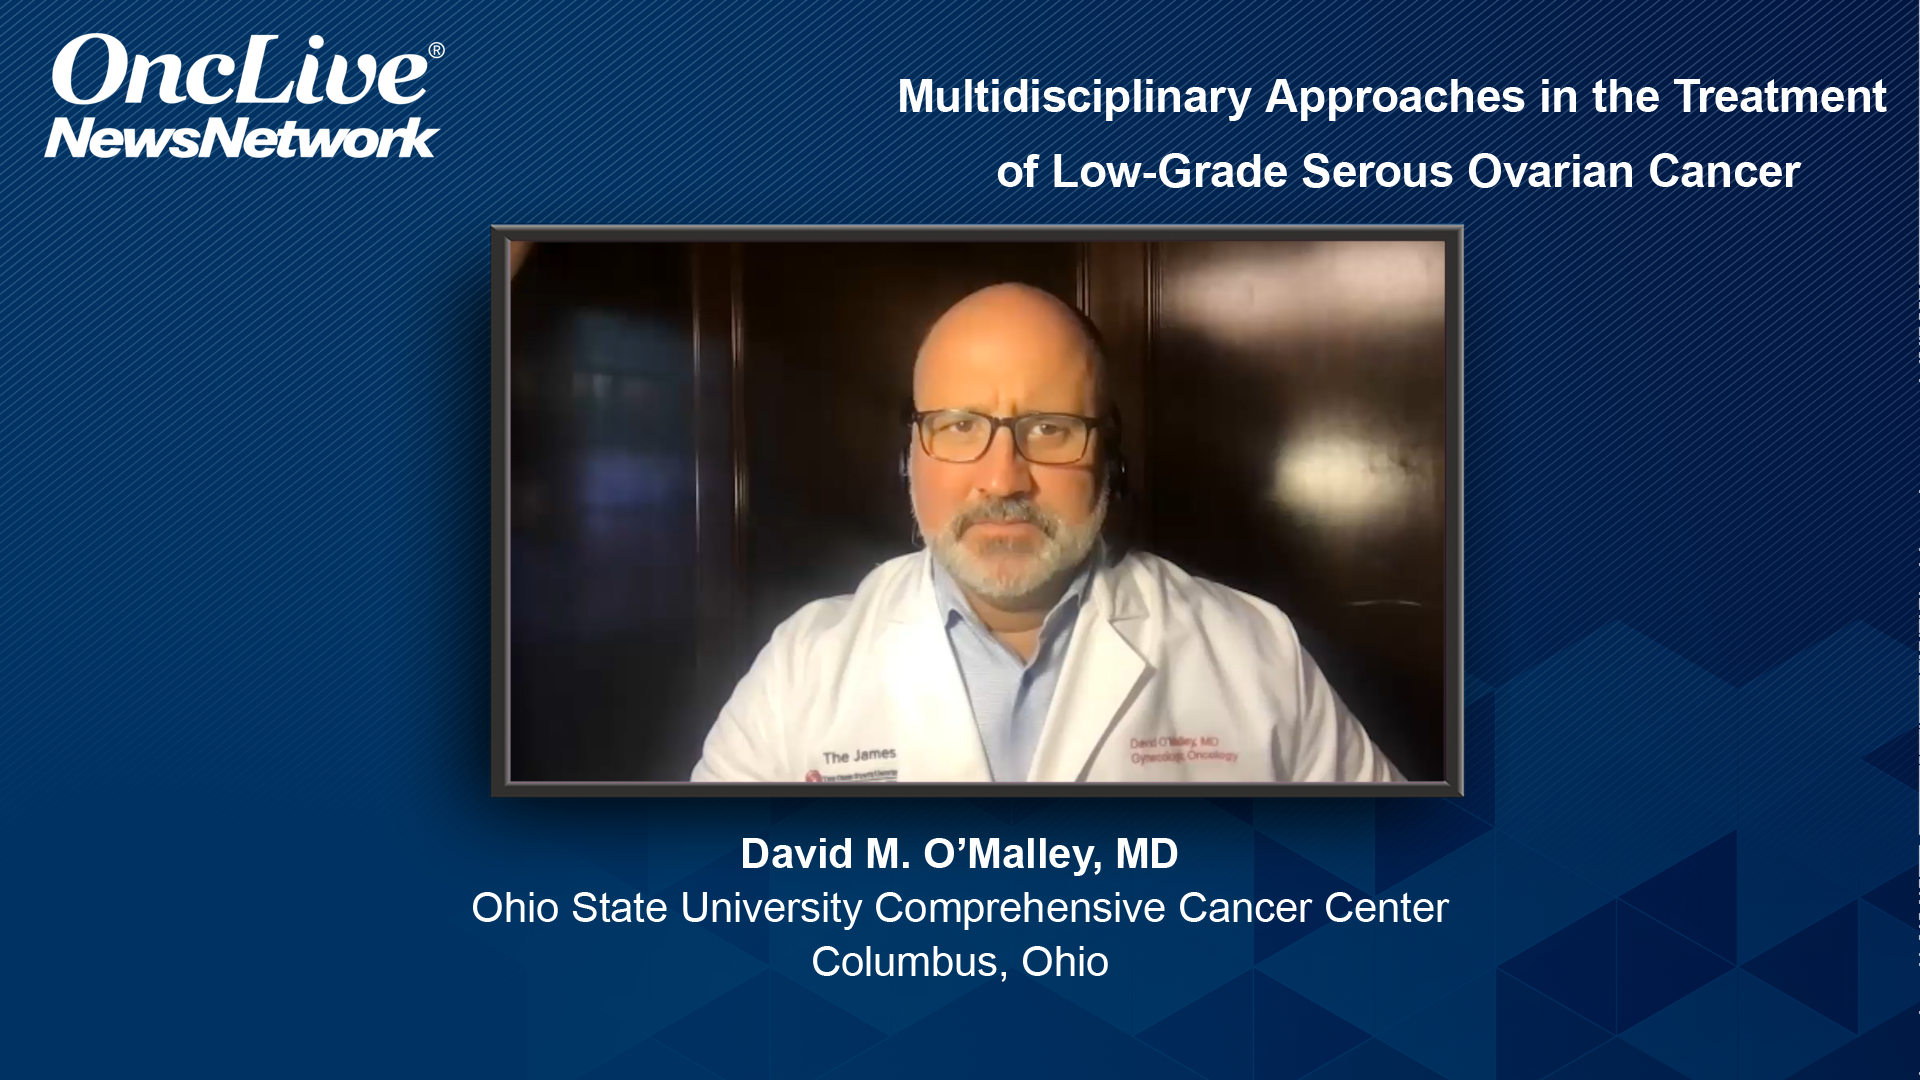 Multidisciplinary Approaches in the Treatment of Low-Grade Serous Ovarian Cancer